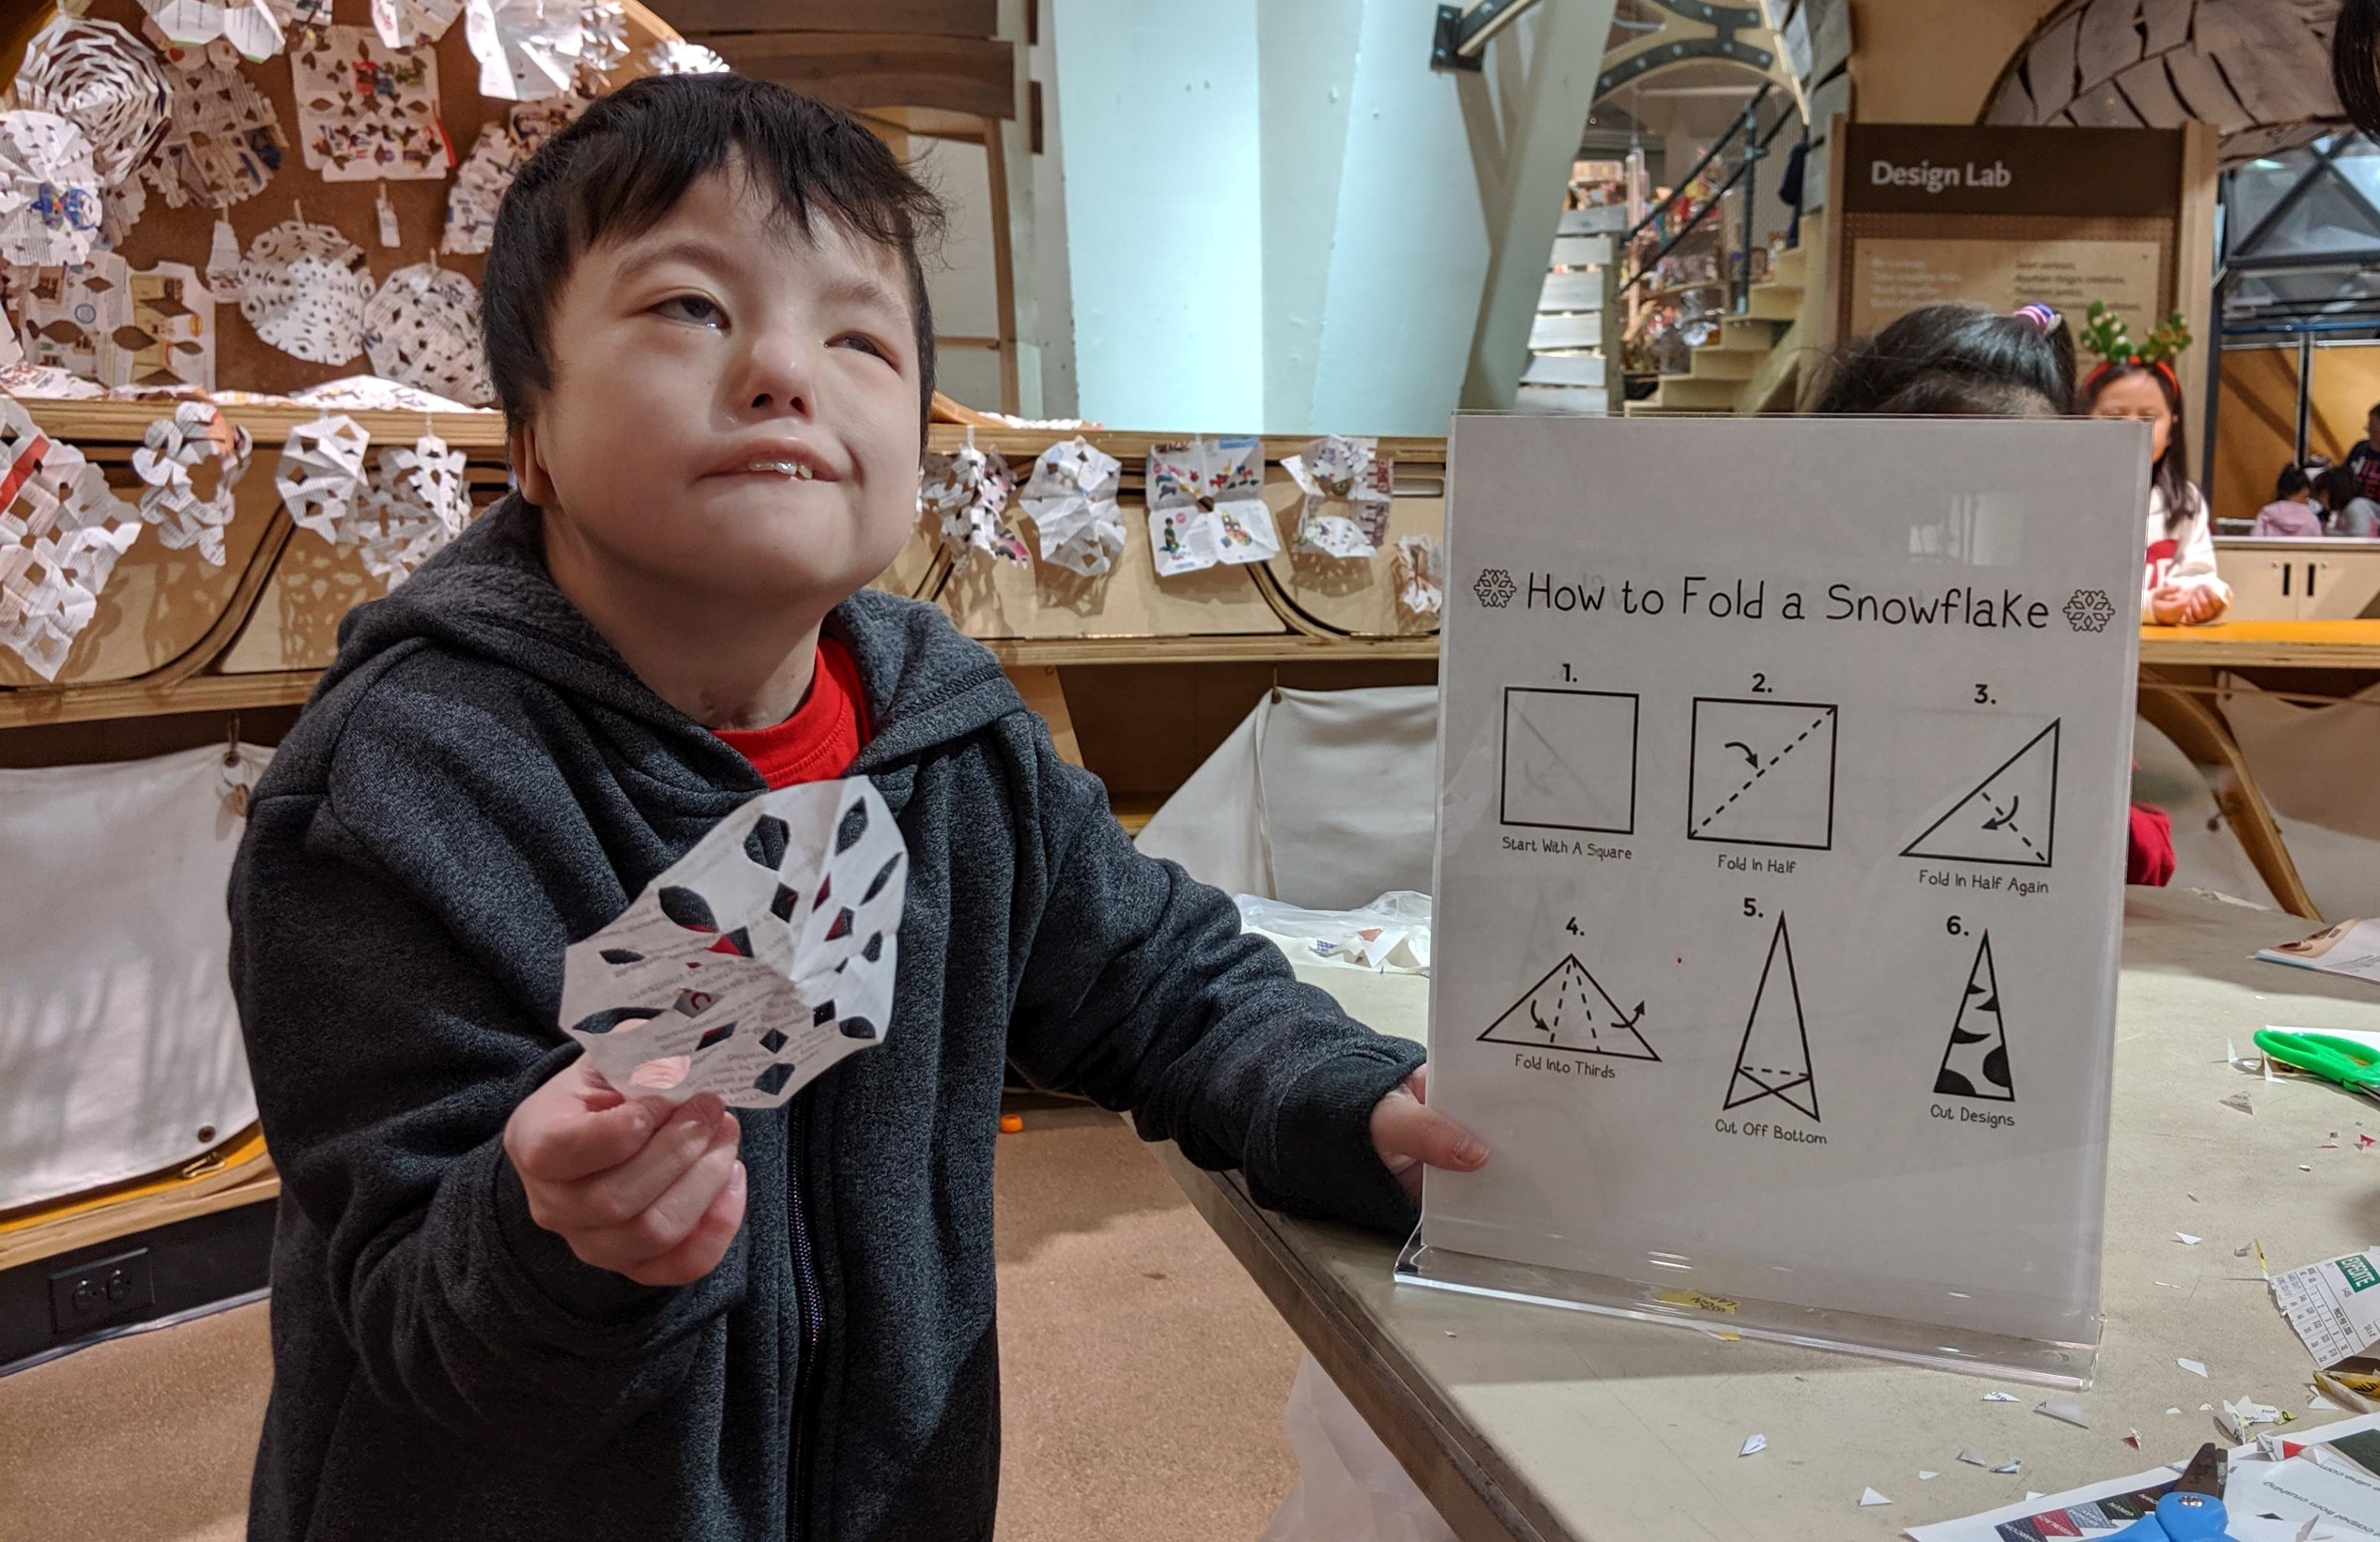 An 11-year-old boy with CHARGE syndrome is holding a paper snowflake in one hand and a paper with illustrations showing how to fold a snowflake in the other.